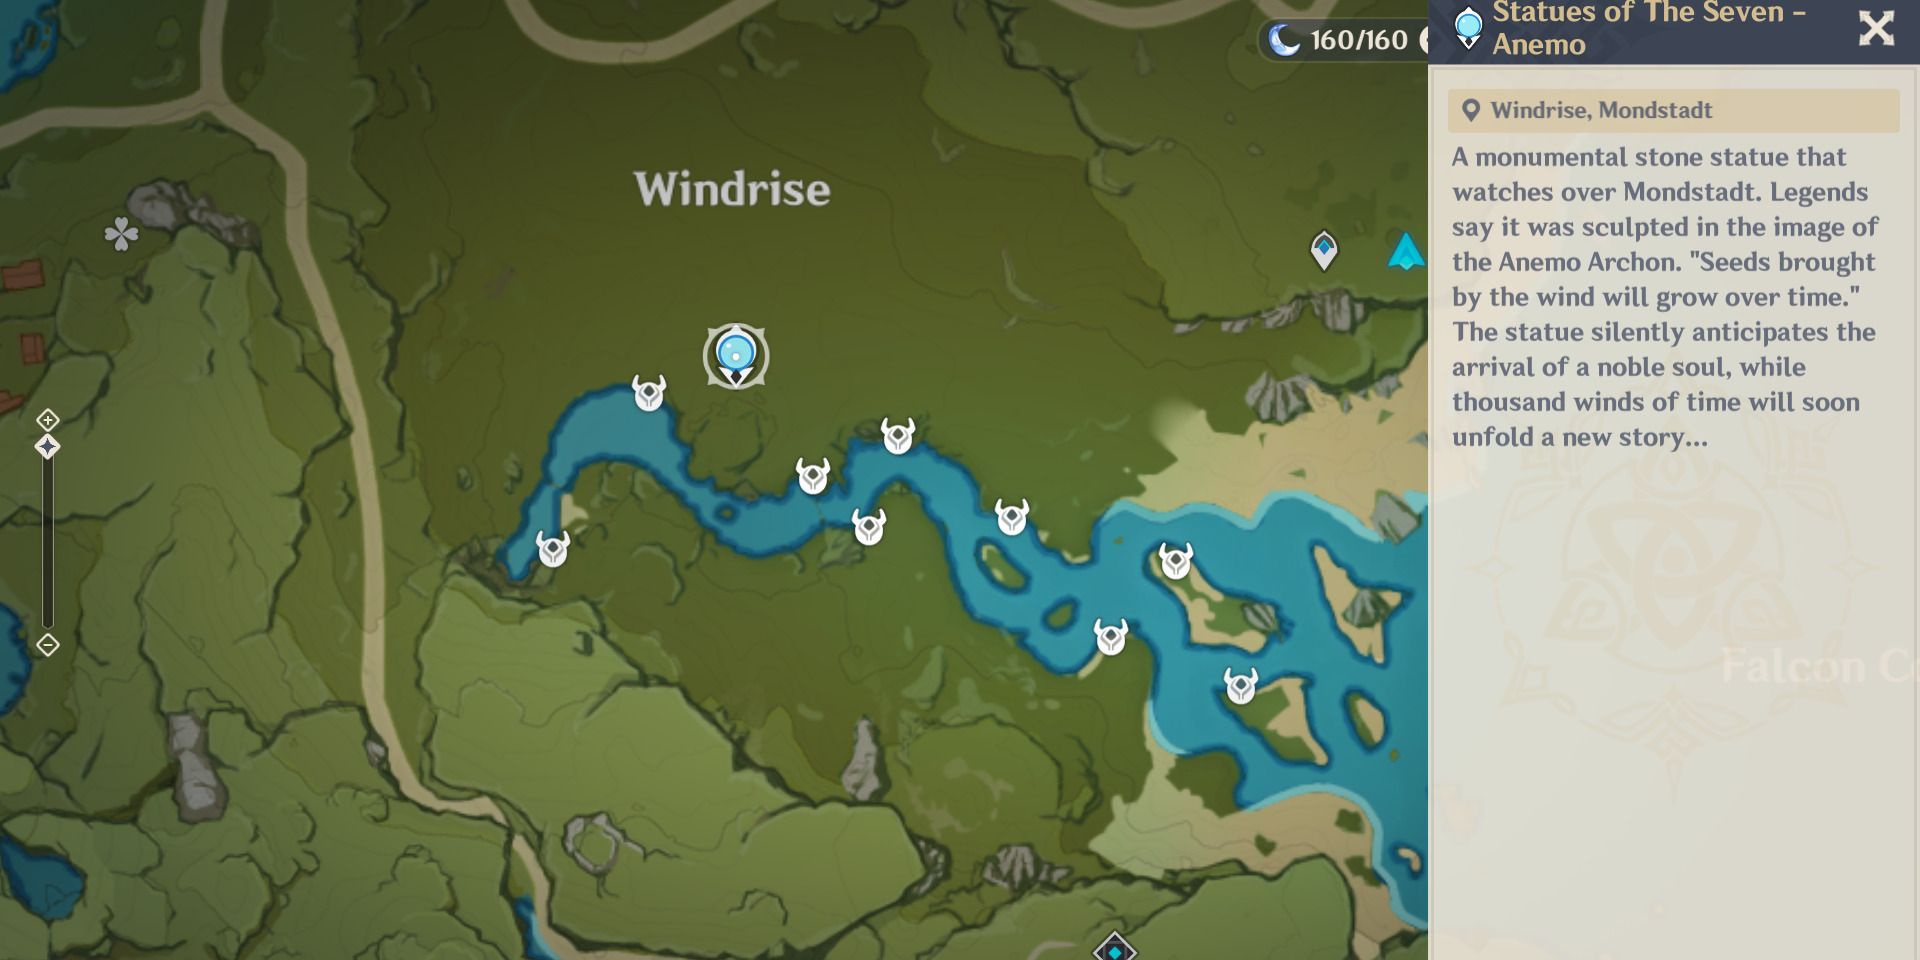 Image of location on Snapdragons map near Windrise River and Falcon Coast in Genshin Impact.